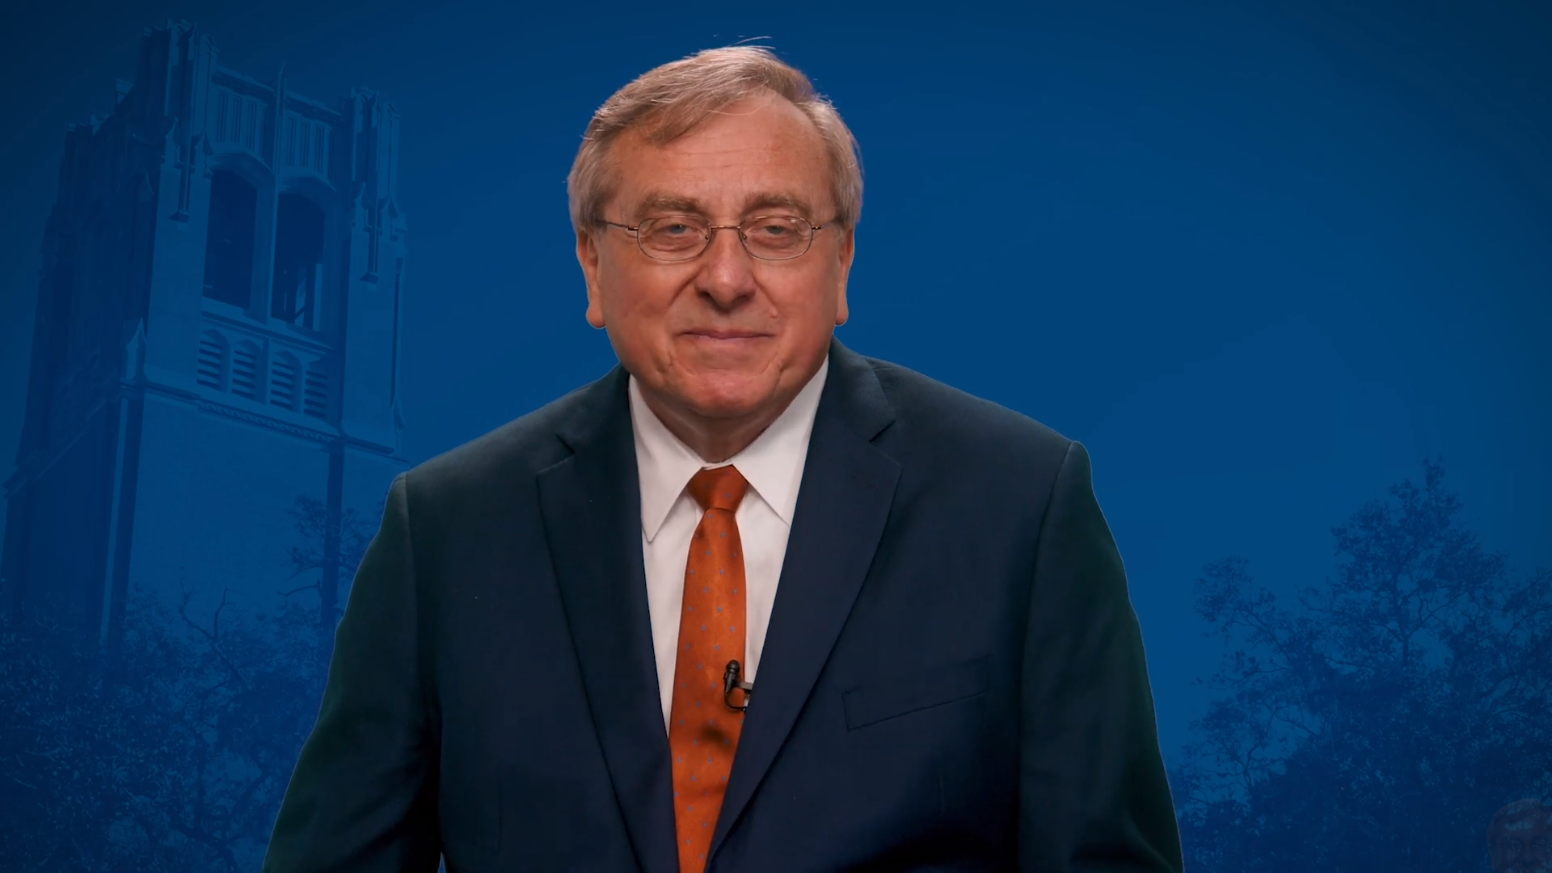 Video: President Fuchs Commemorates One Year of the University of Florida